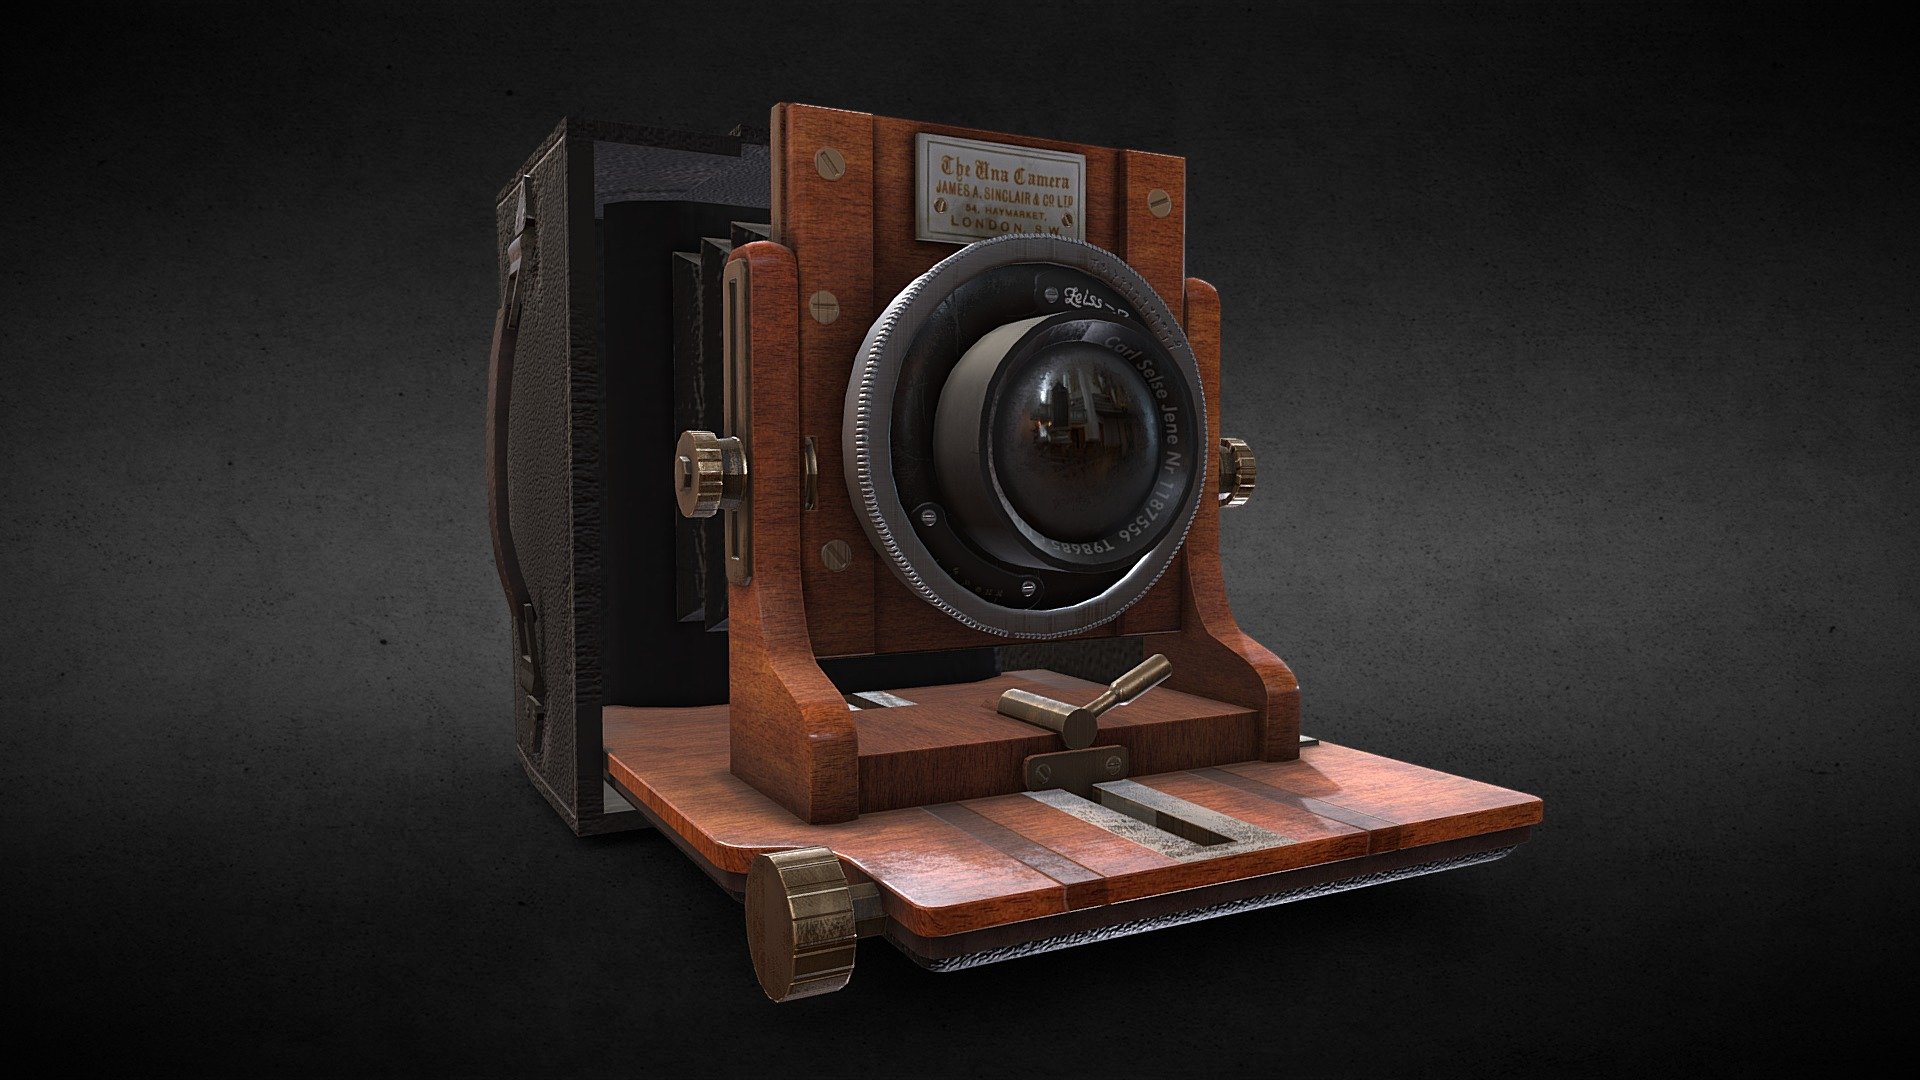 This camera is based on the Sinclair &lsquo;Una' model. It was used by Harry Burton to record over 1400 photographs of objects found at the Kv62 site in the Valley of the Kings in Luxor, Egypt. This tomb was discovered by Howard Carter in 1922 and houses the funerary remains of Tutankhamen 3d model